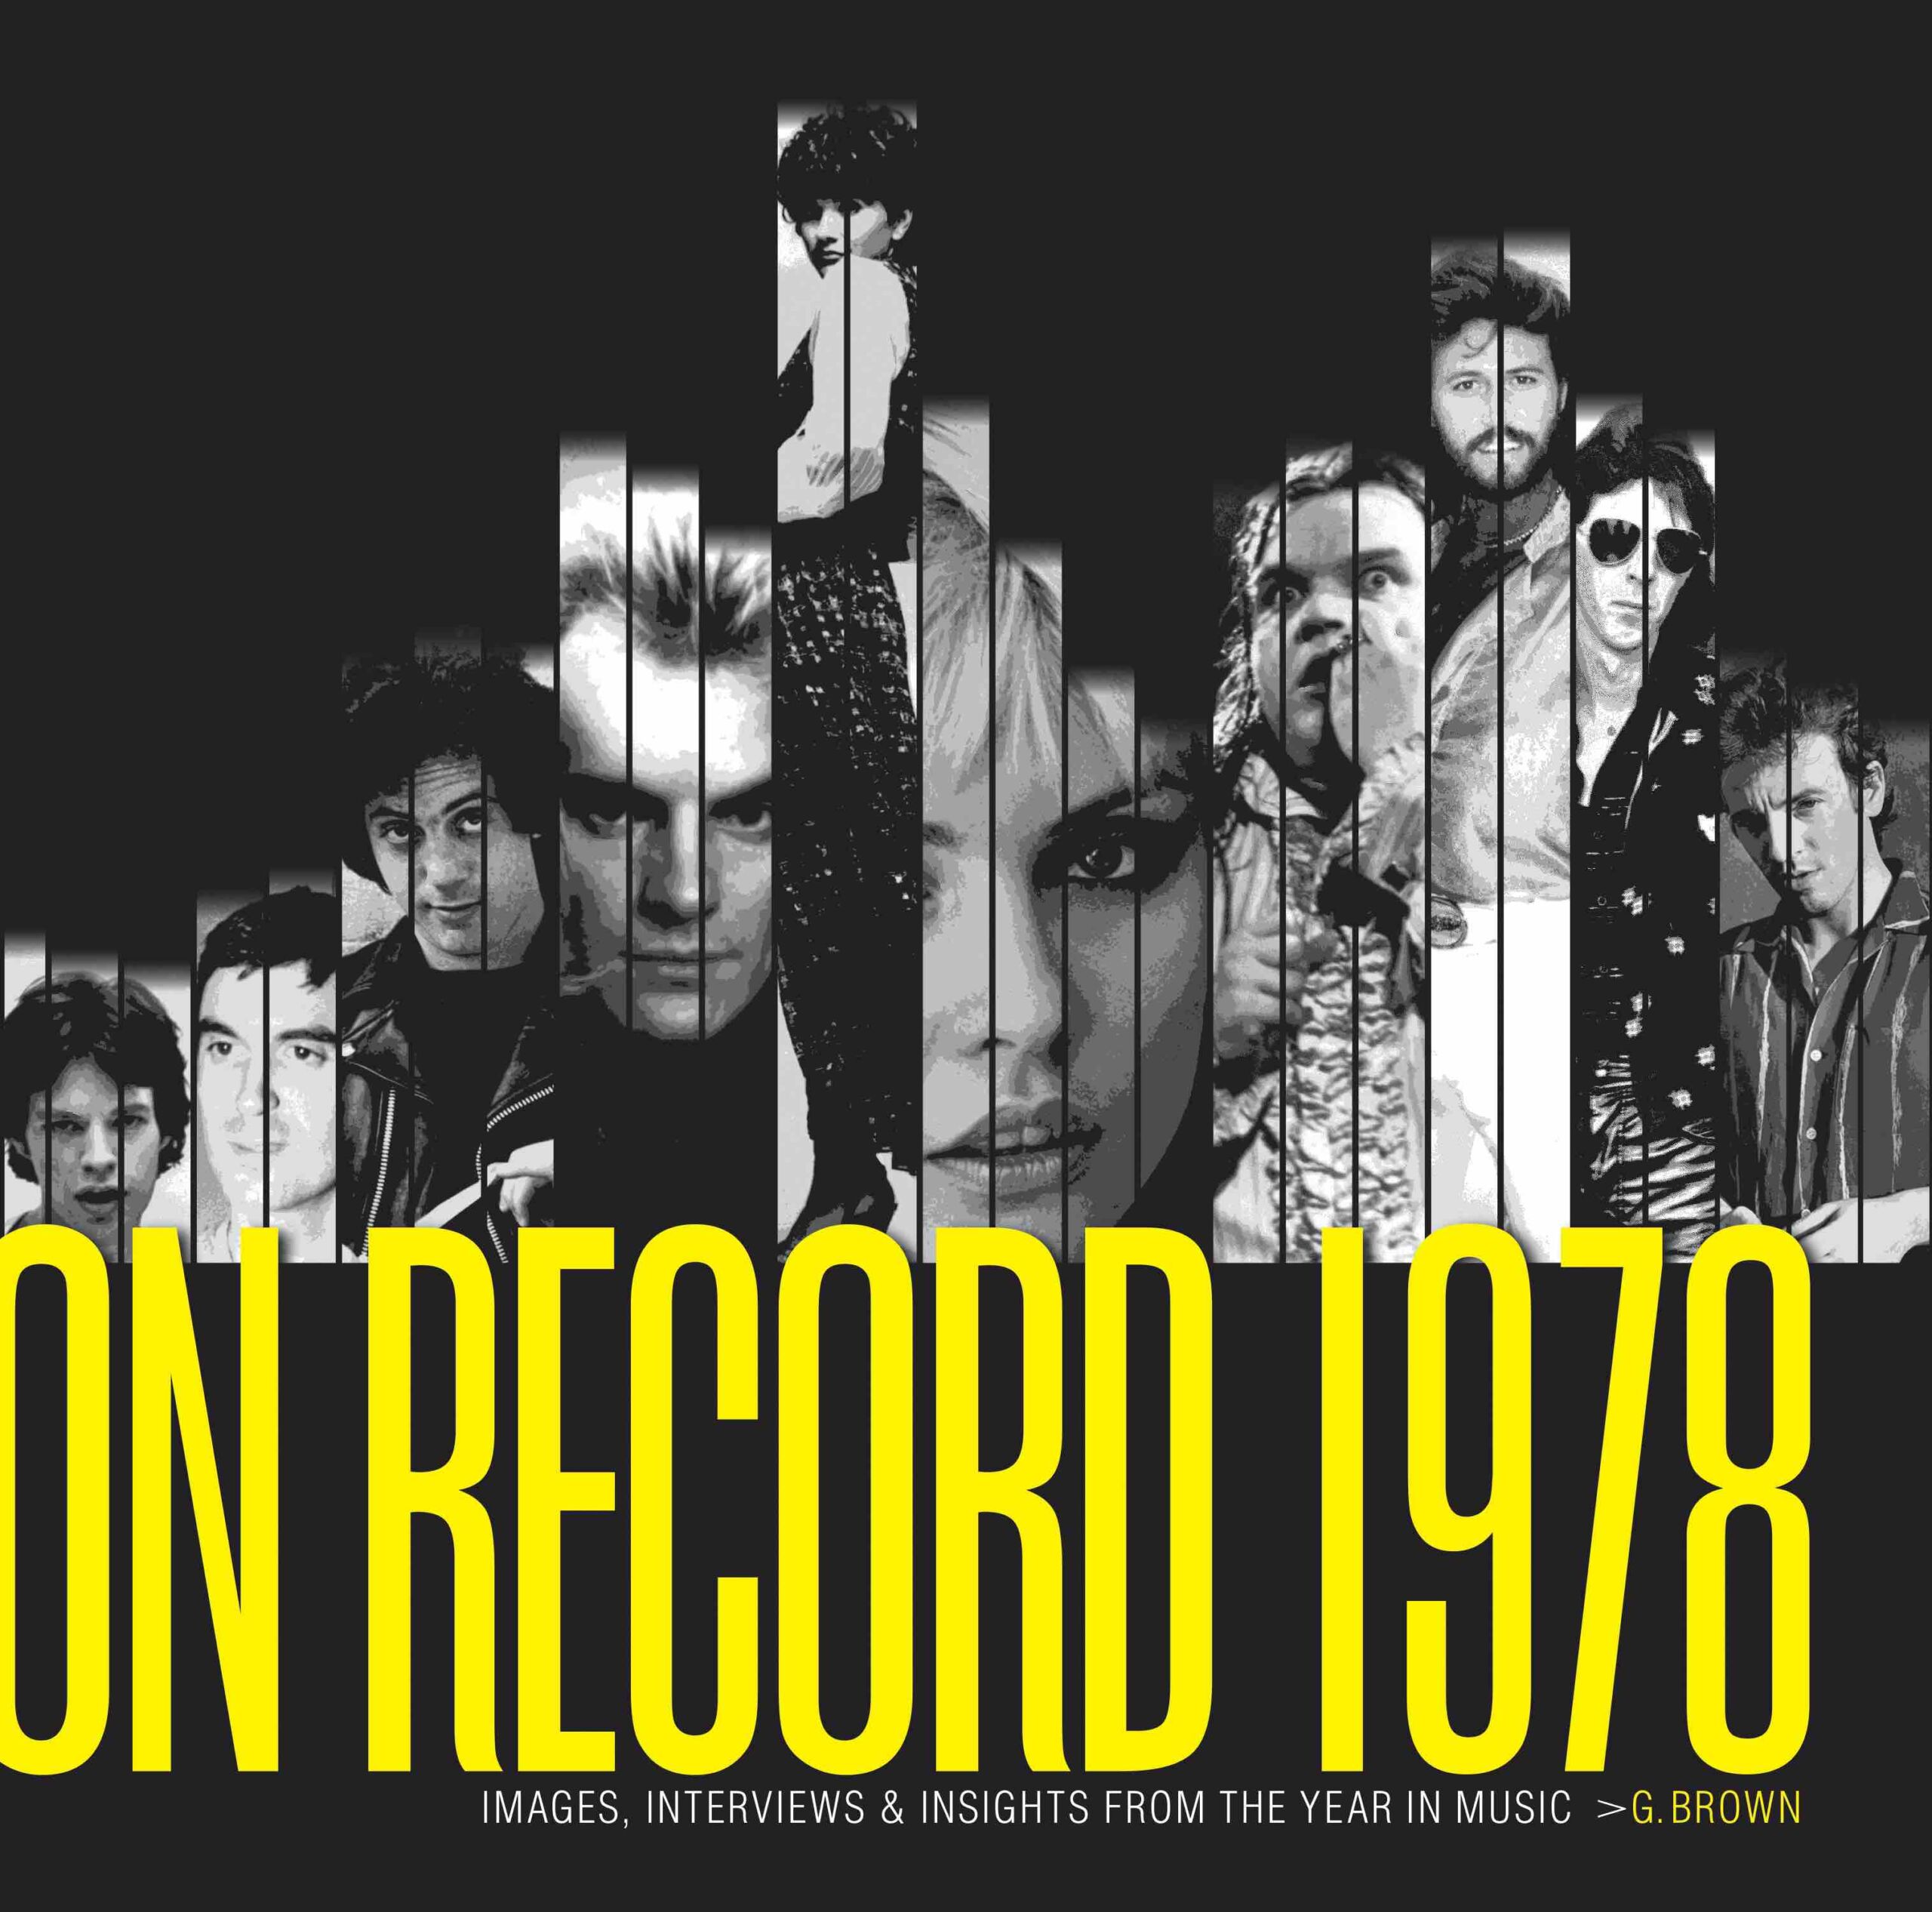 On Record 1978 by G. Brown